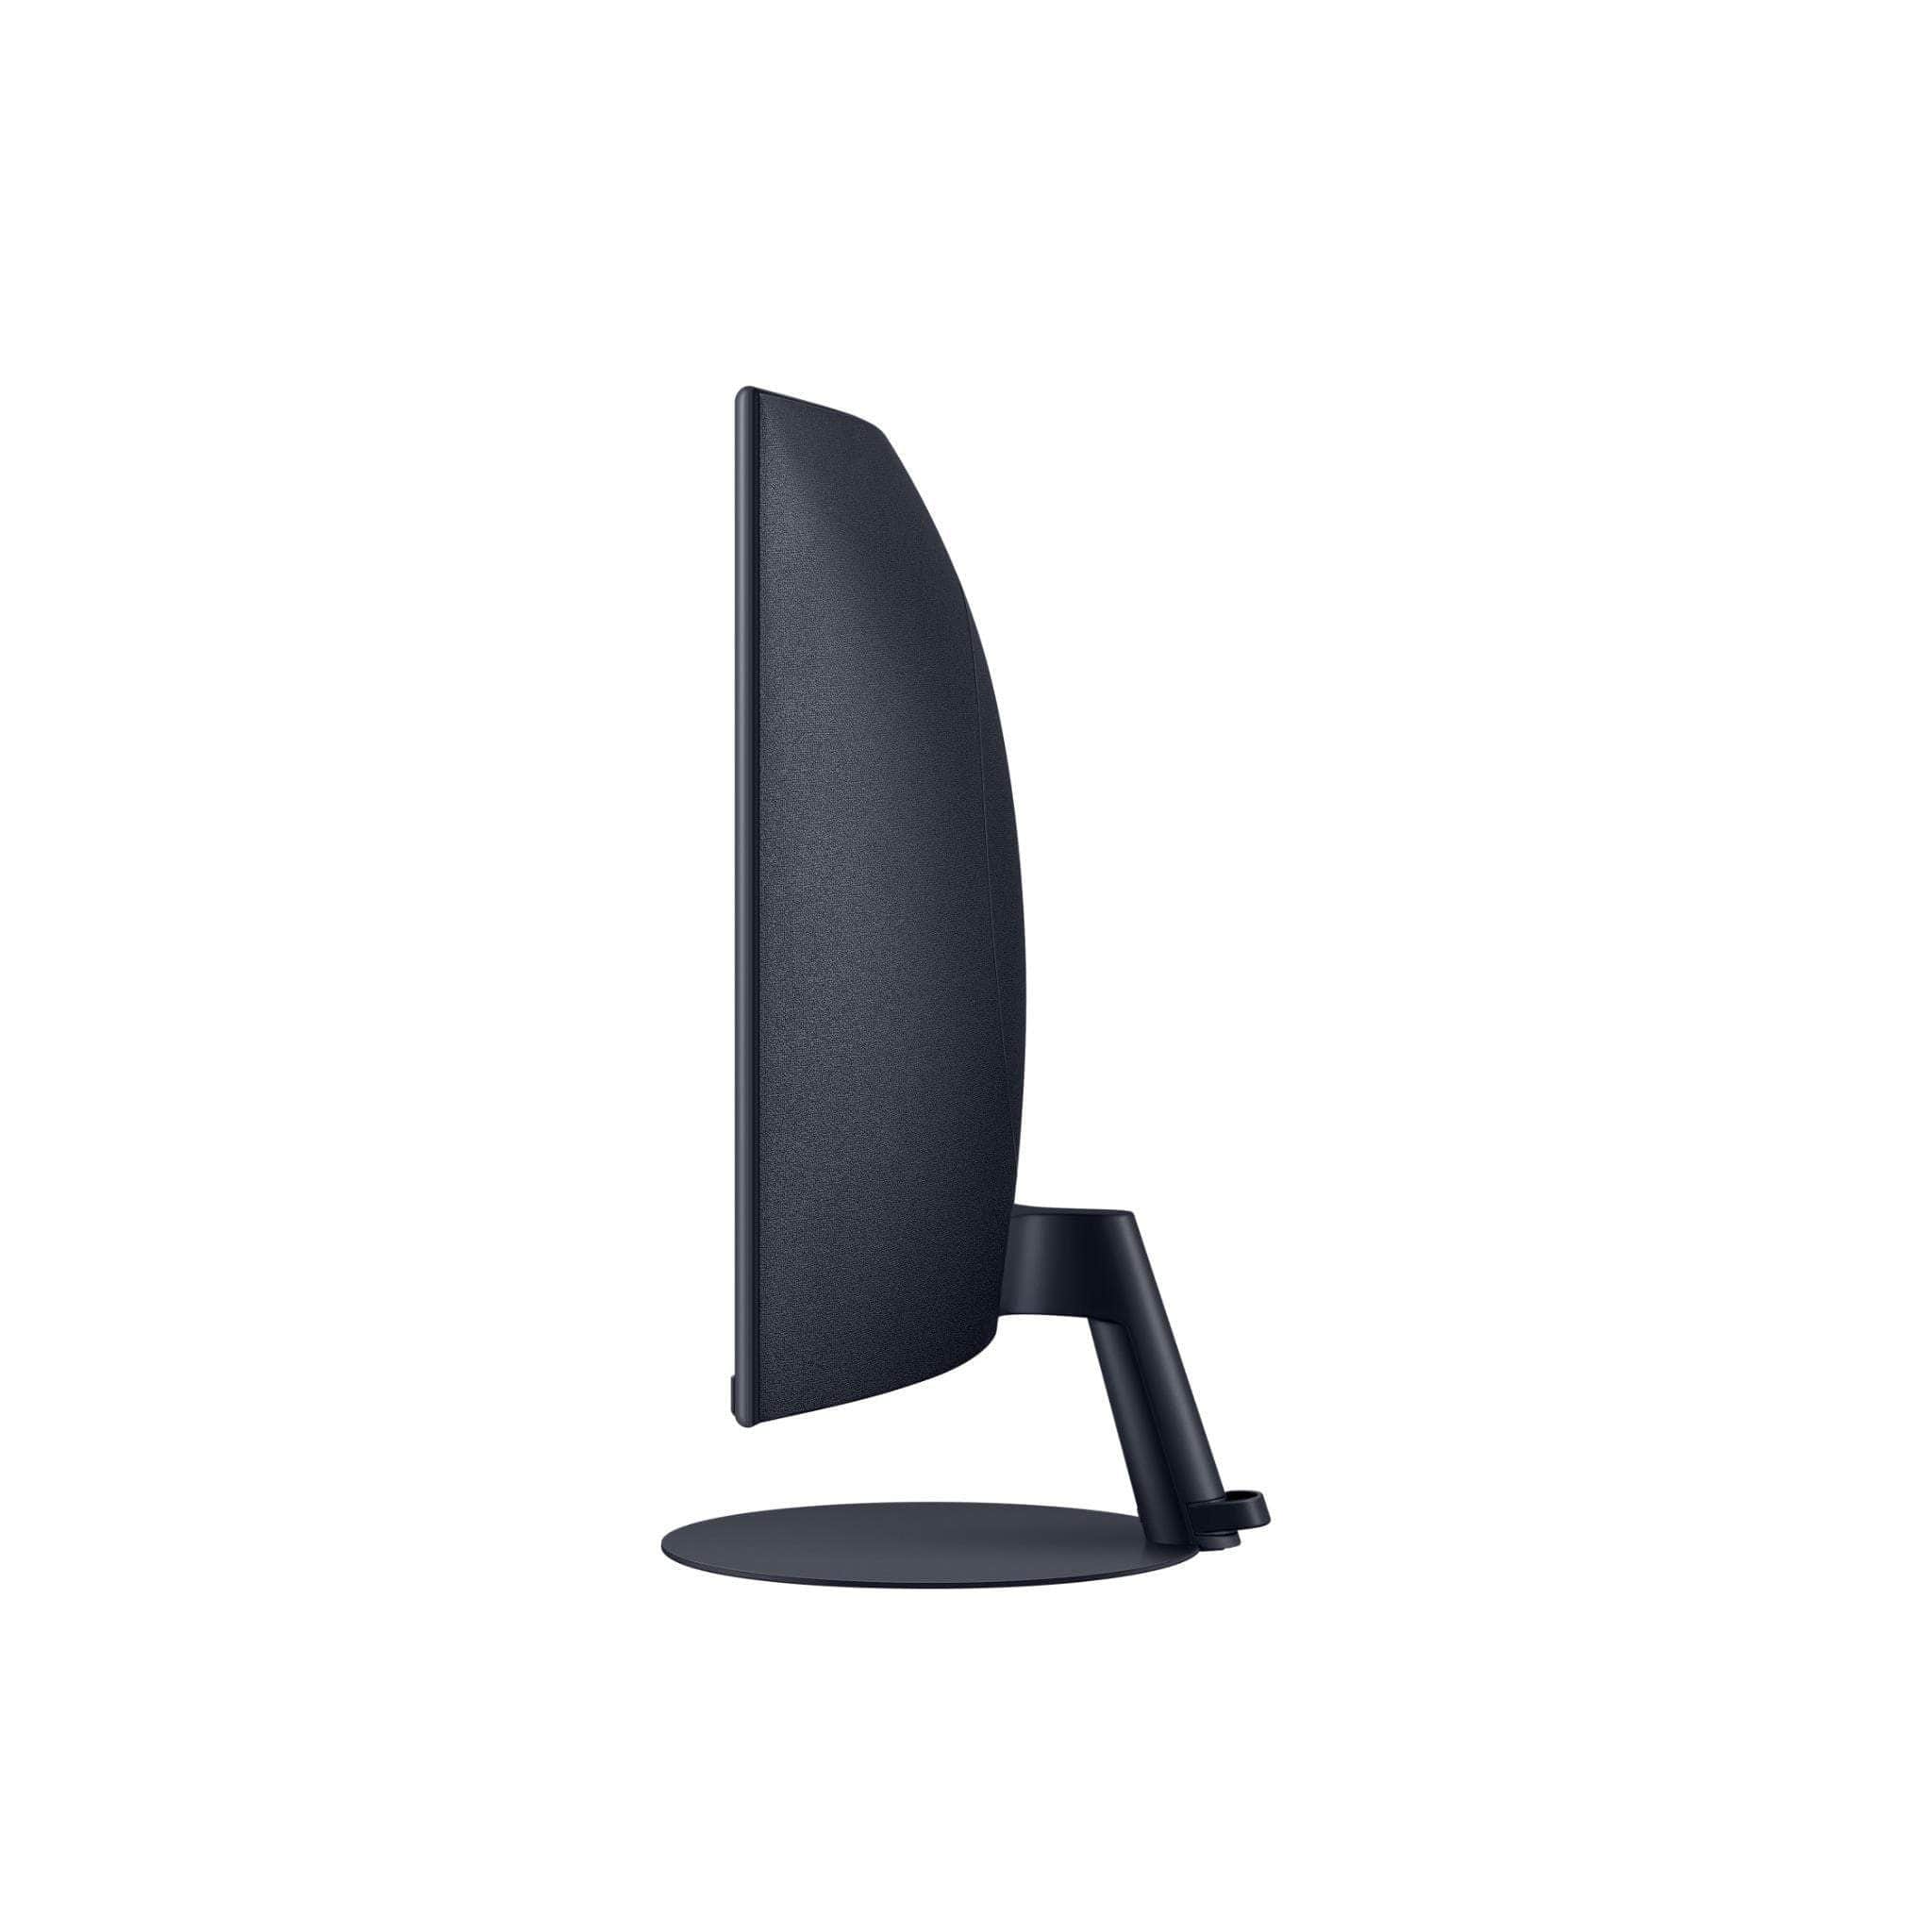 Samsung S39C 32' Full HD Curved Monitor